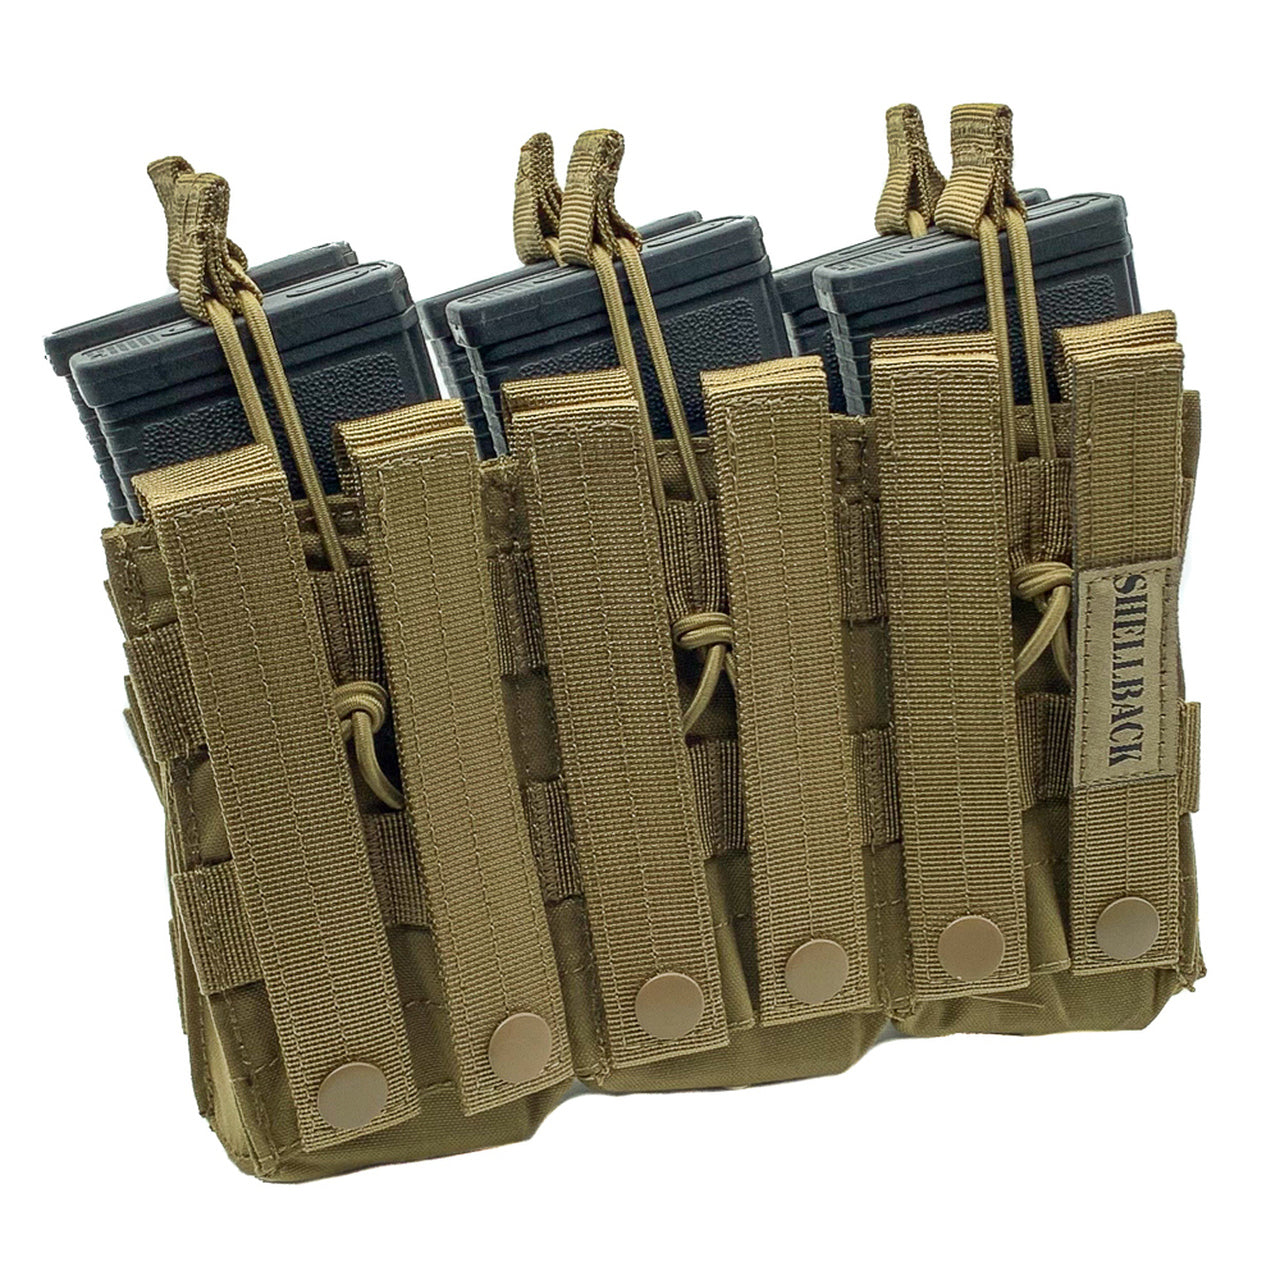 A Shellback Tactical Triple Stacker Open Top M4 Mag Pouch on a white background.